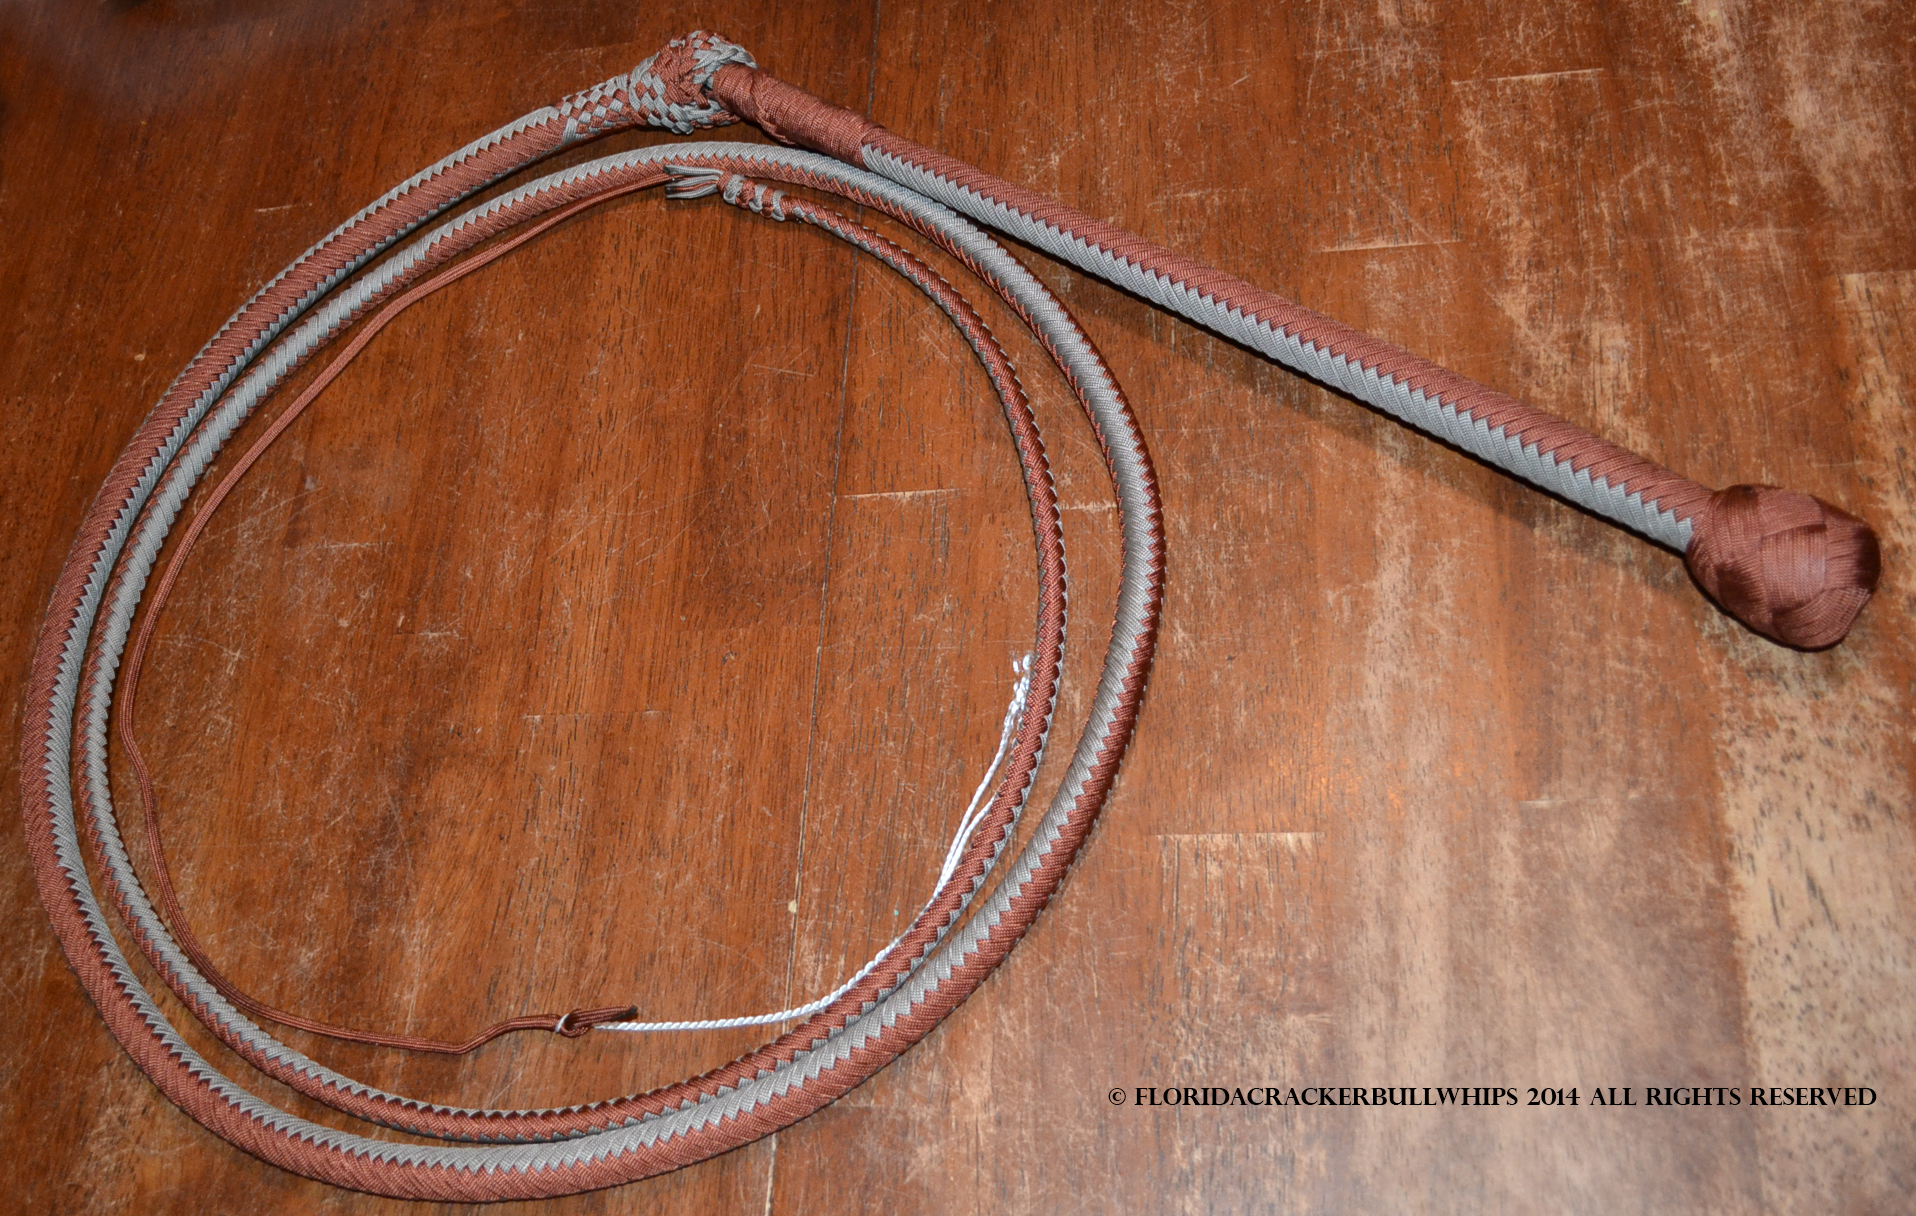 16 plait nylon stock whip in cow tale pattern colors chocolate brown and gray.